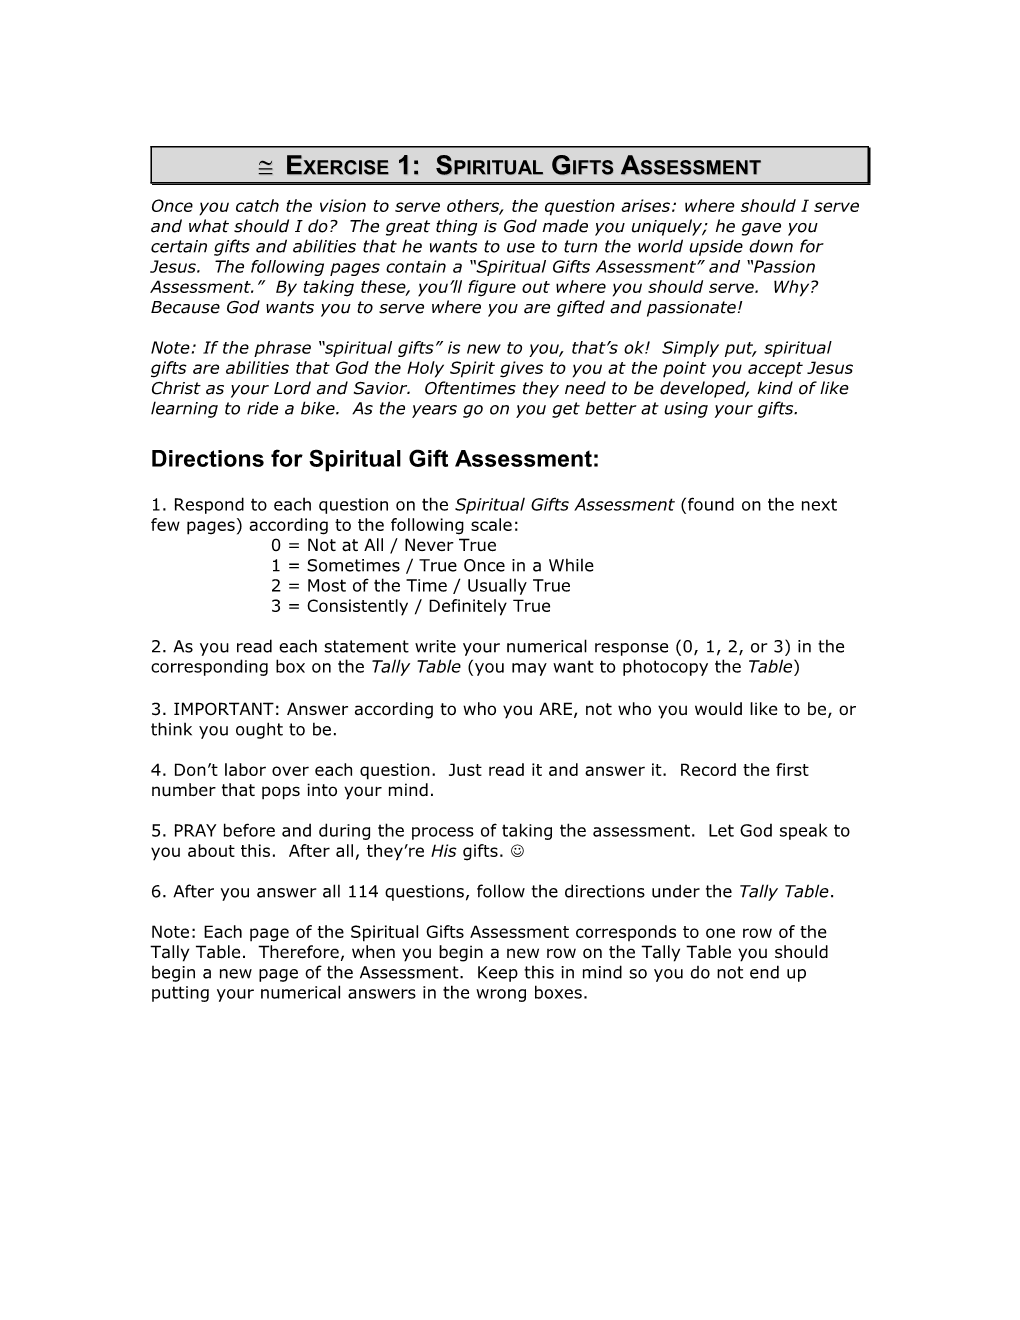 Exercise 1A: Spiritual Gifts Assessment